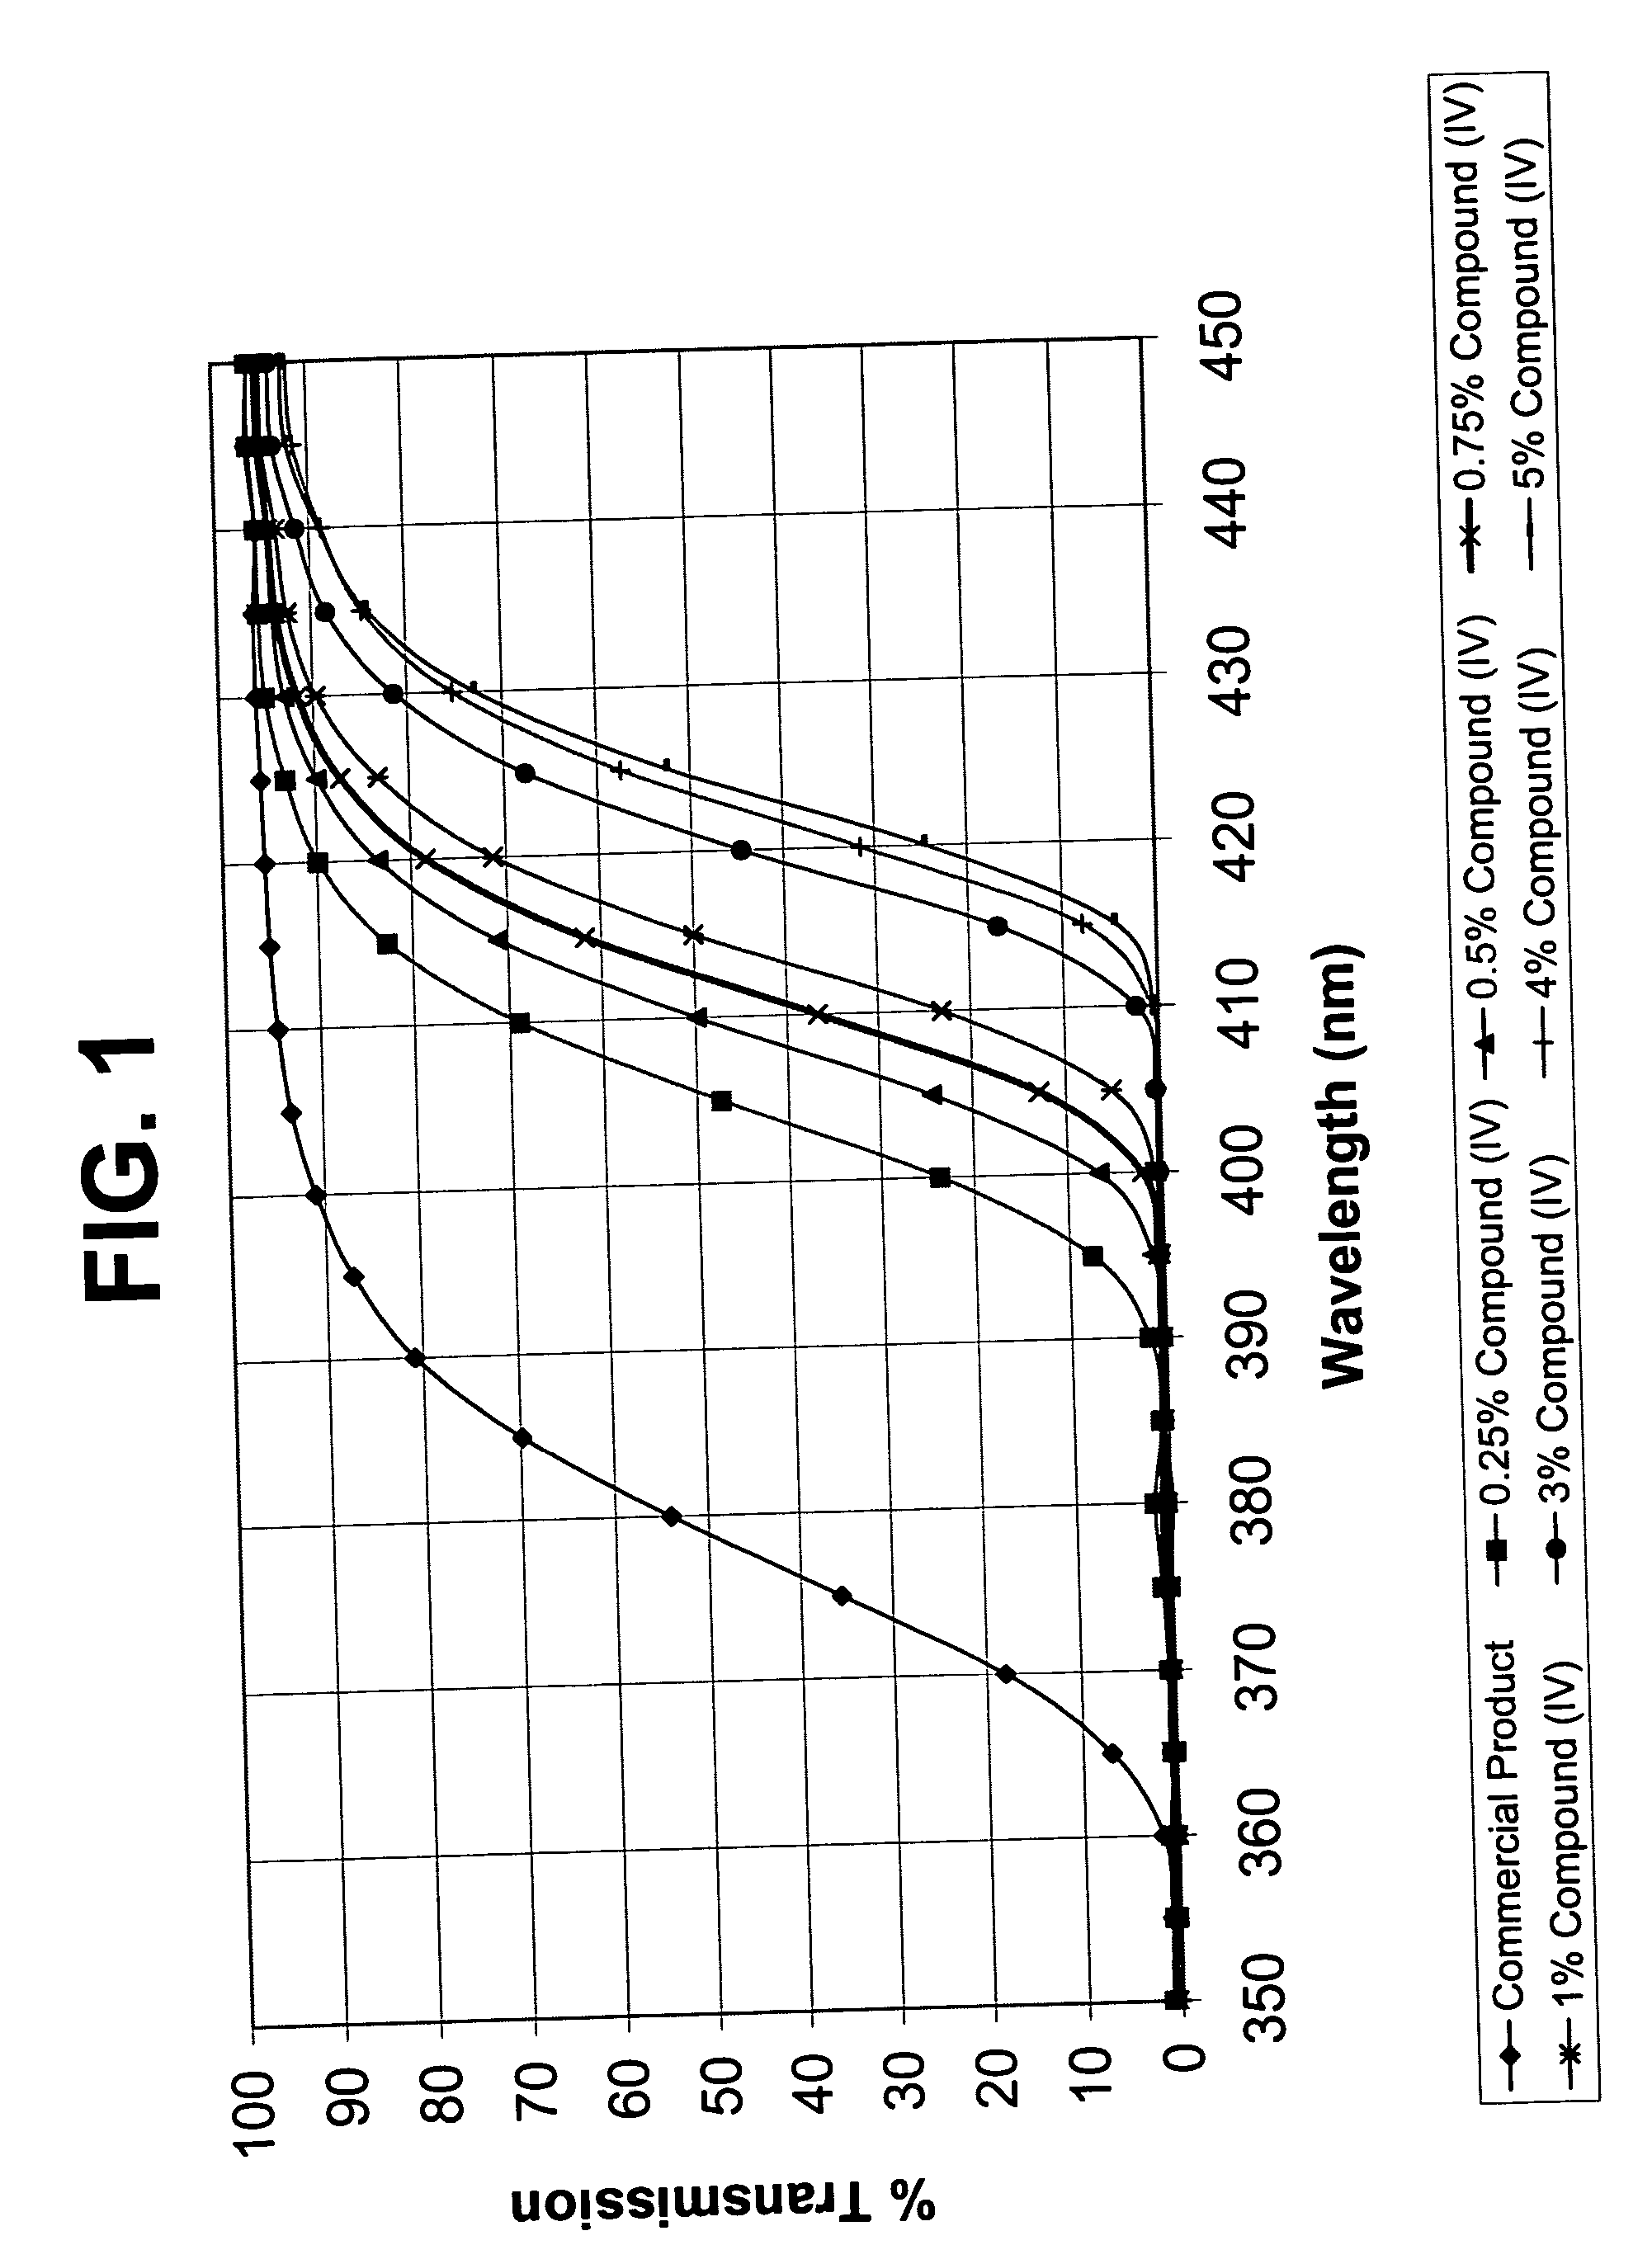 Radiation-absorbing polymeric materials and ophthalmic devices comprising same